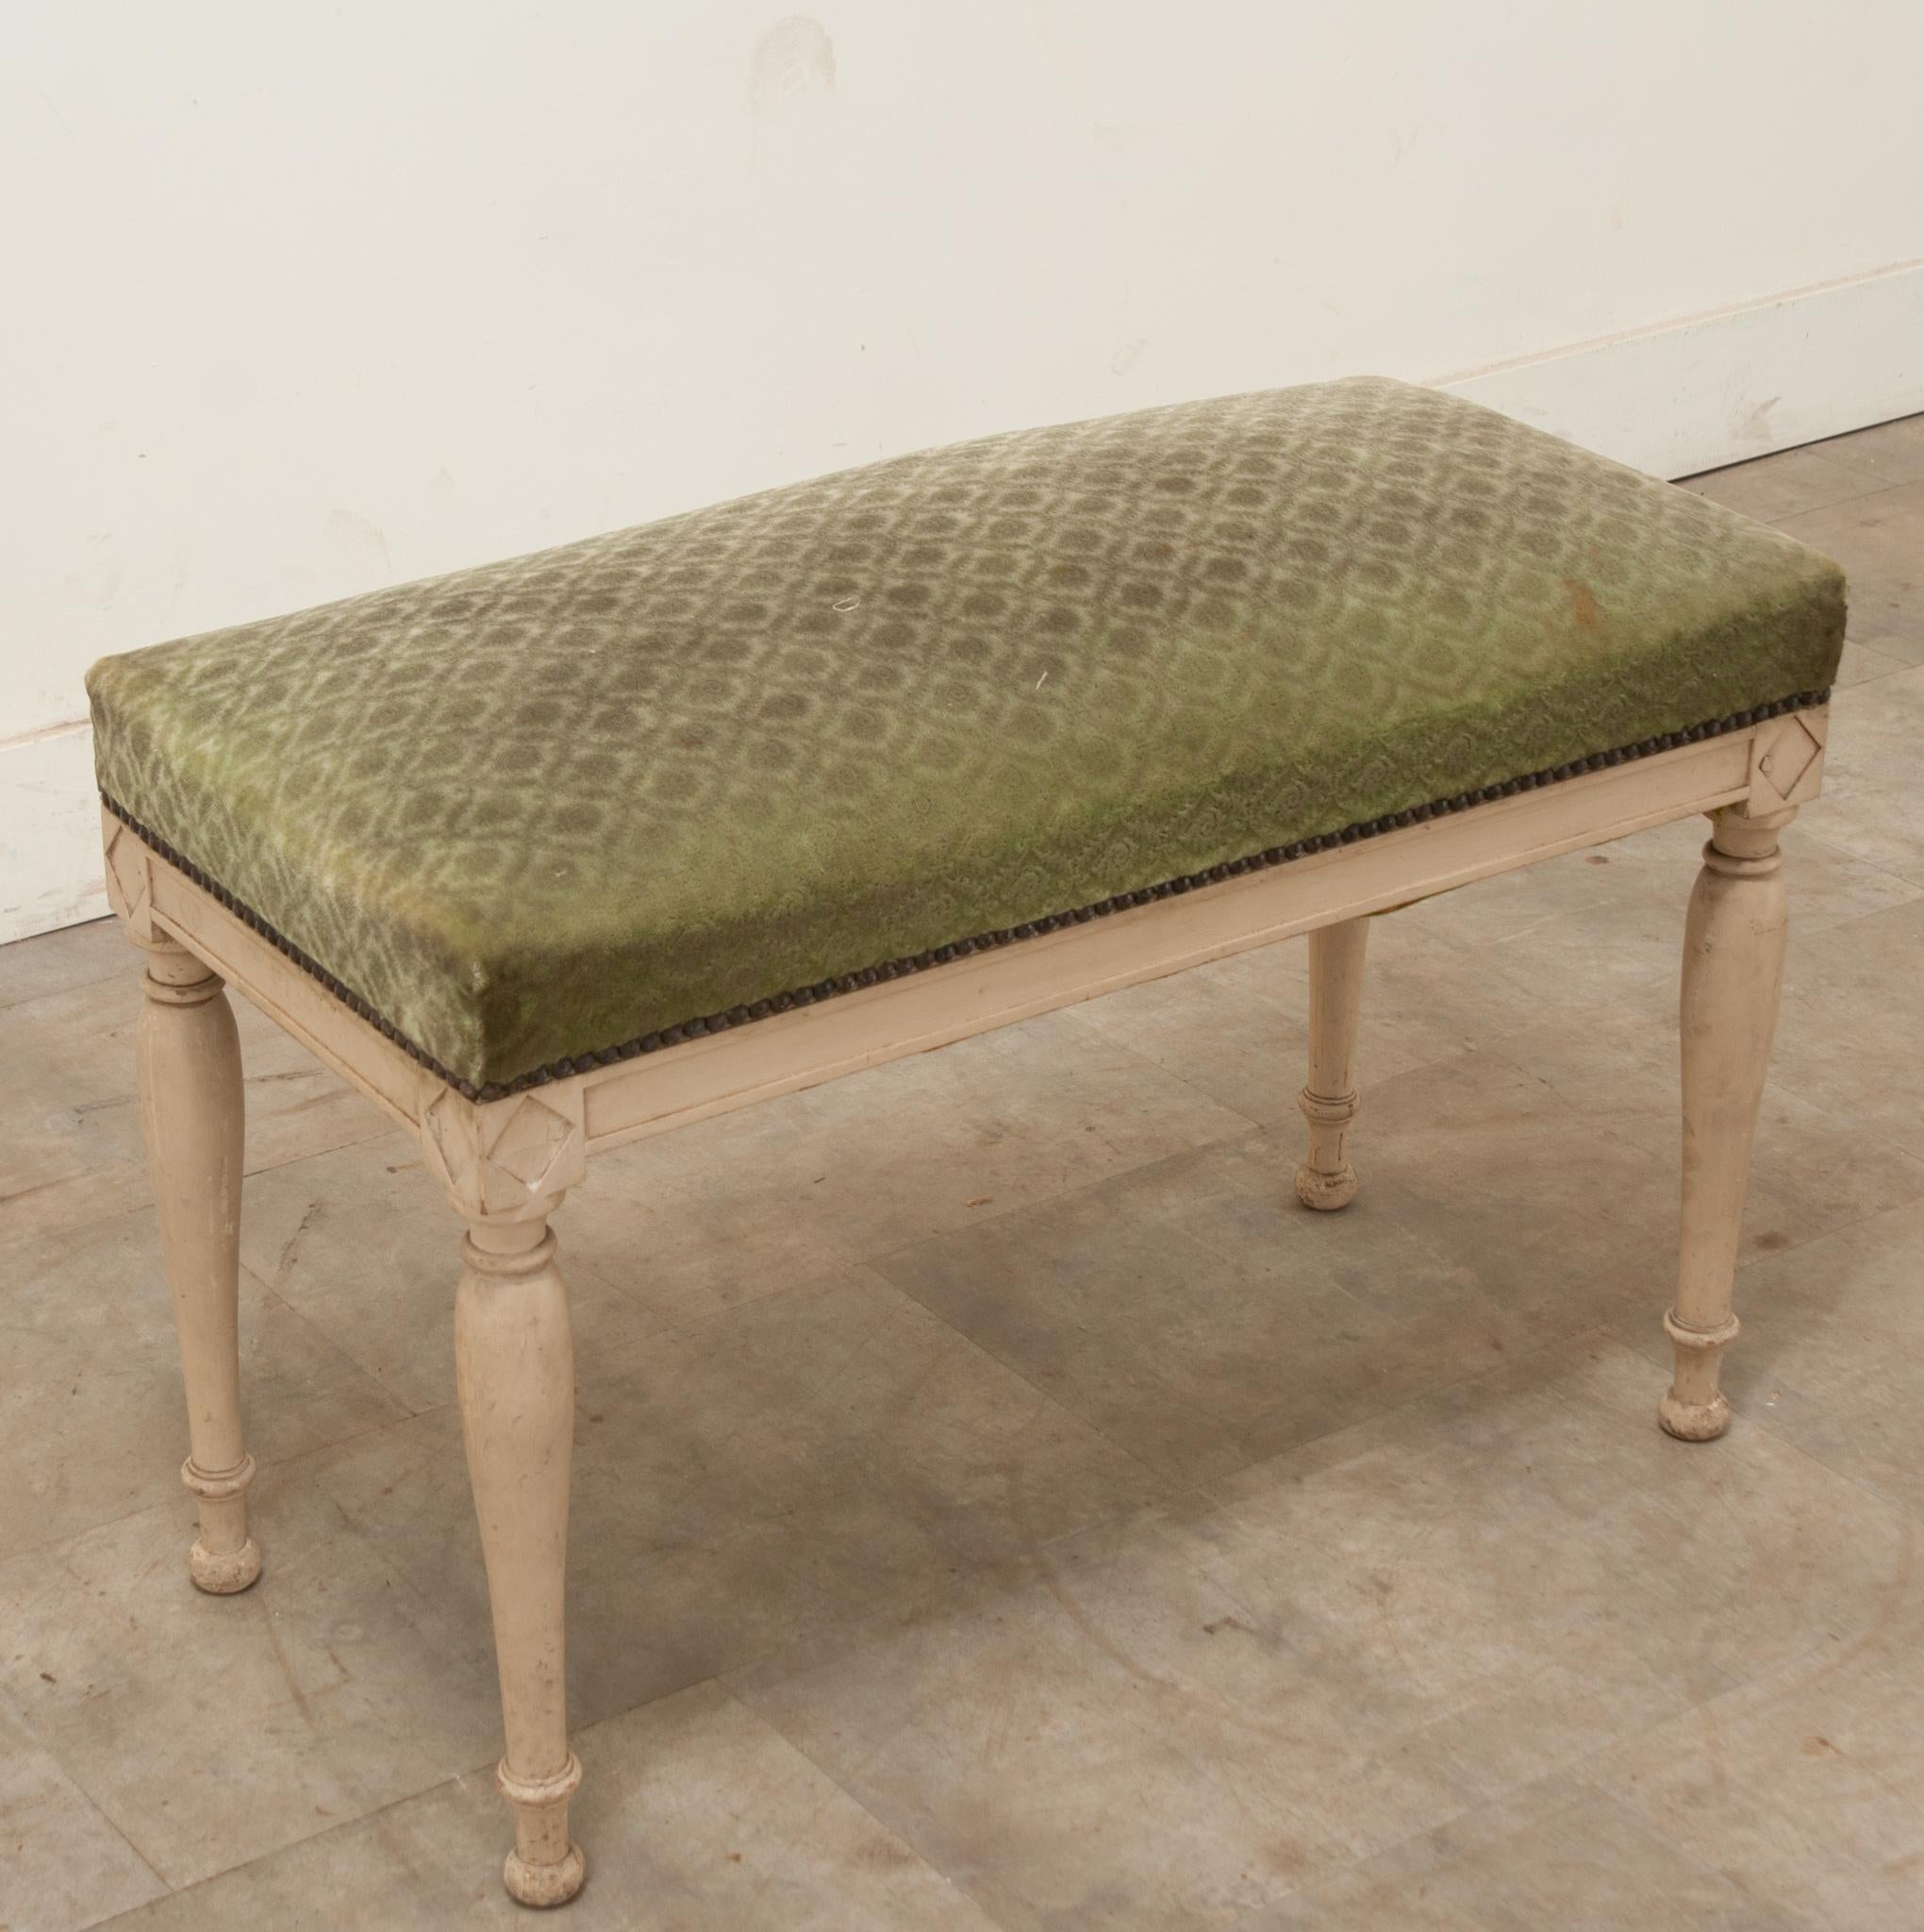 A French Directoire period painted bench made during the late 1700’s. This bench is upholstered in a worn green velvet upholstery with a nailhead trim. The frame has diamond carvings on the corners above its turned legs connected to turned ball